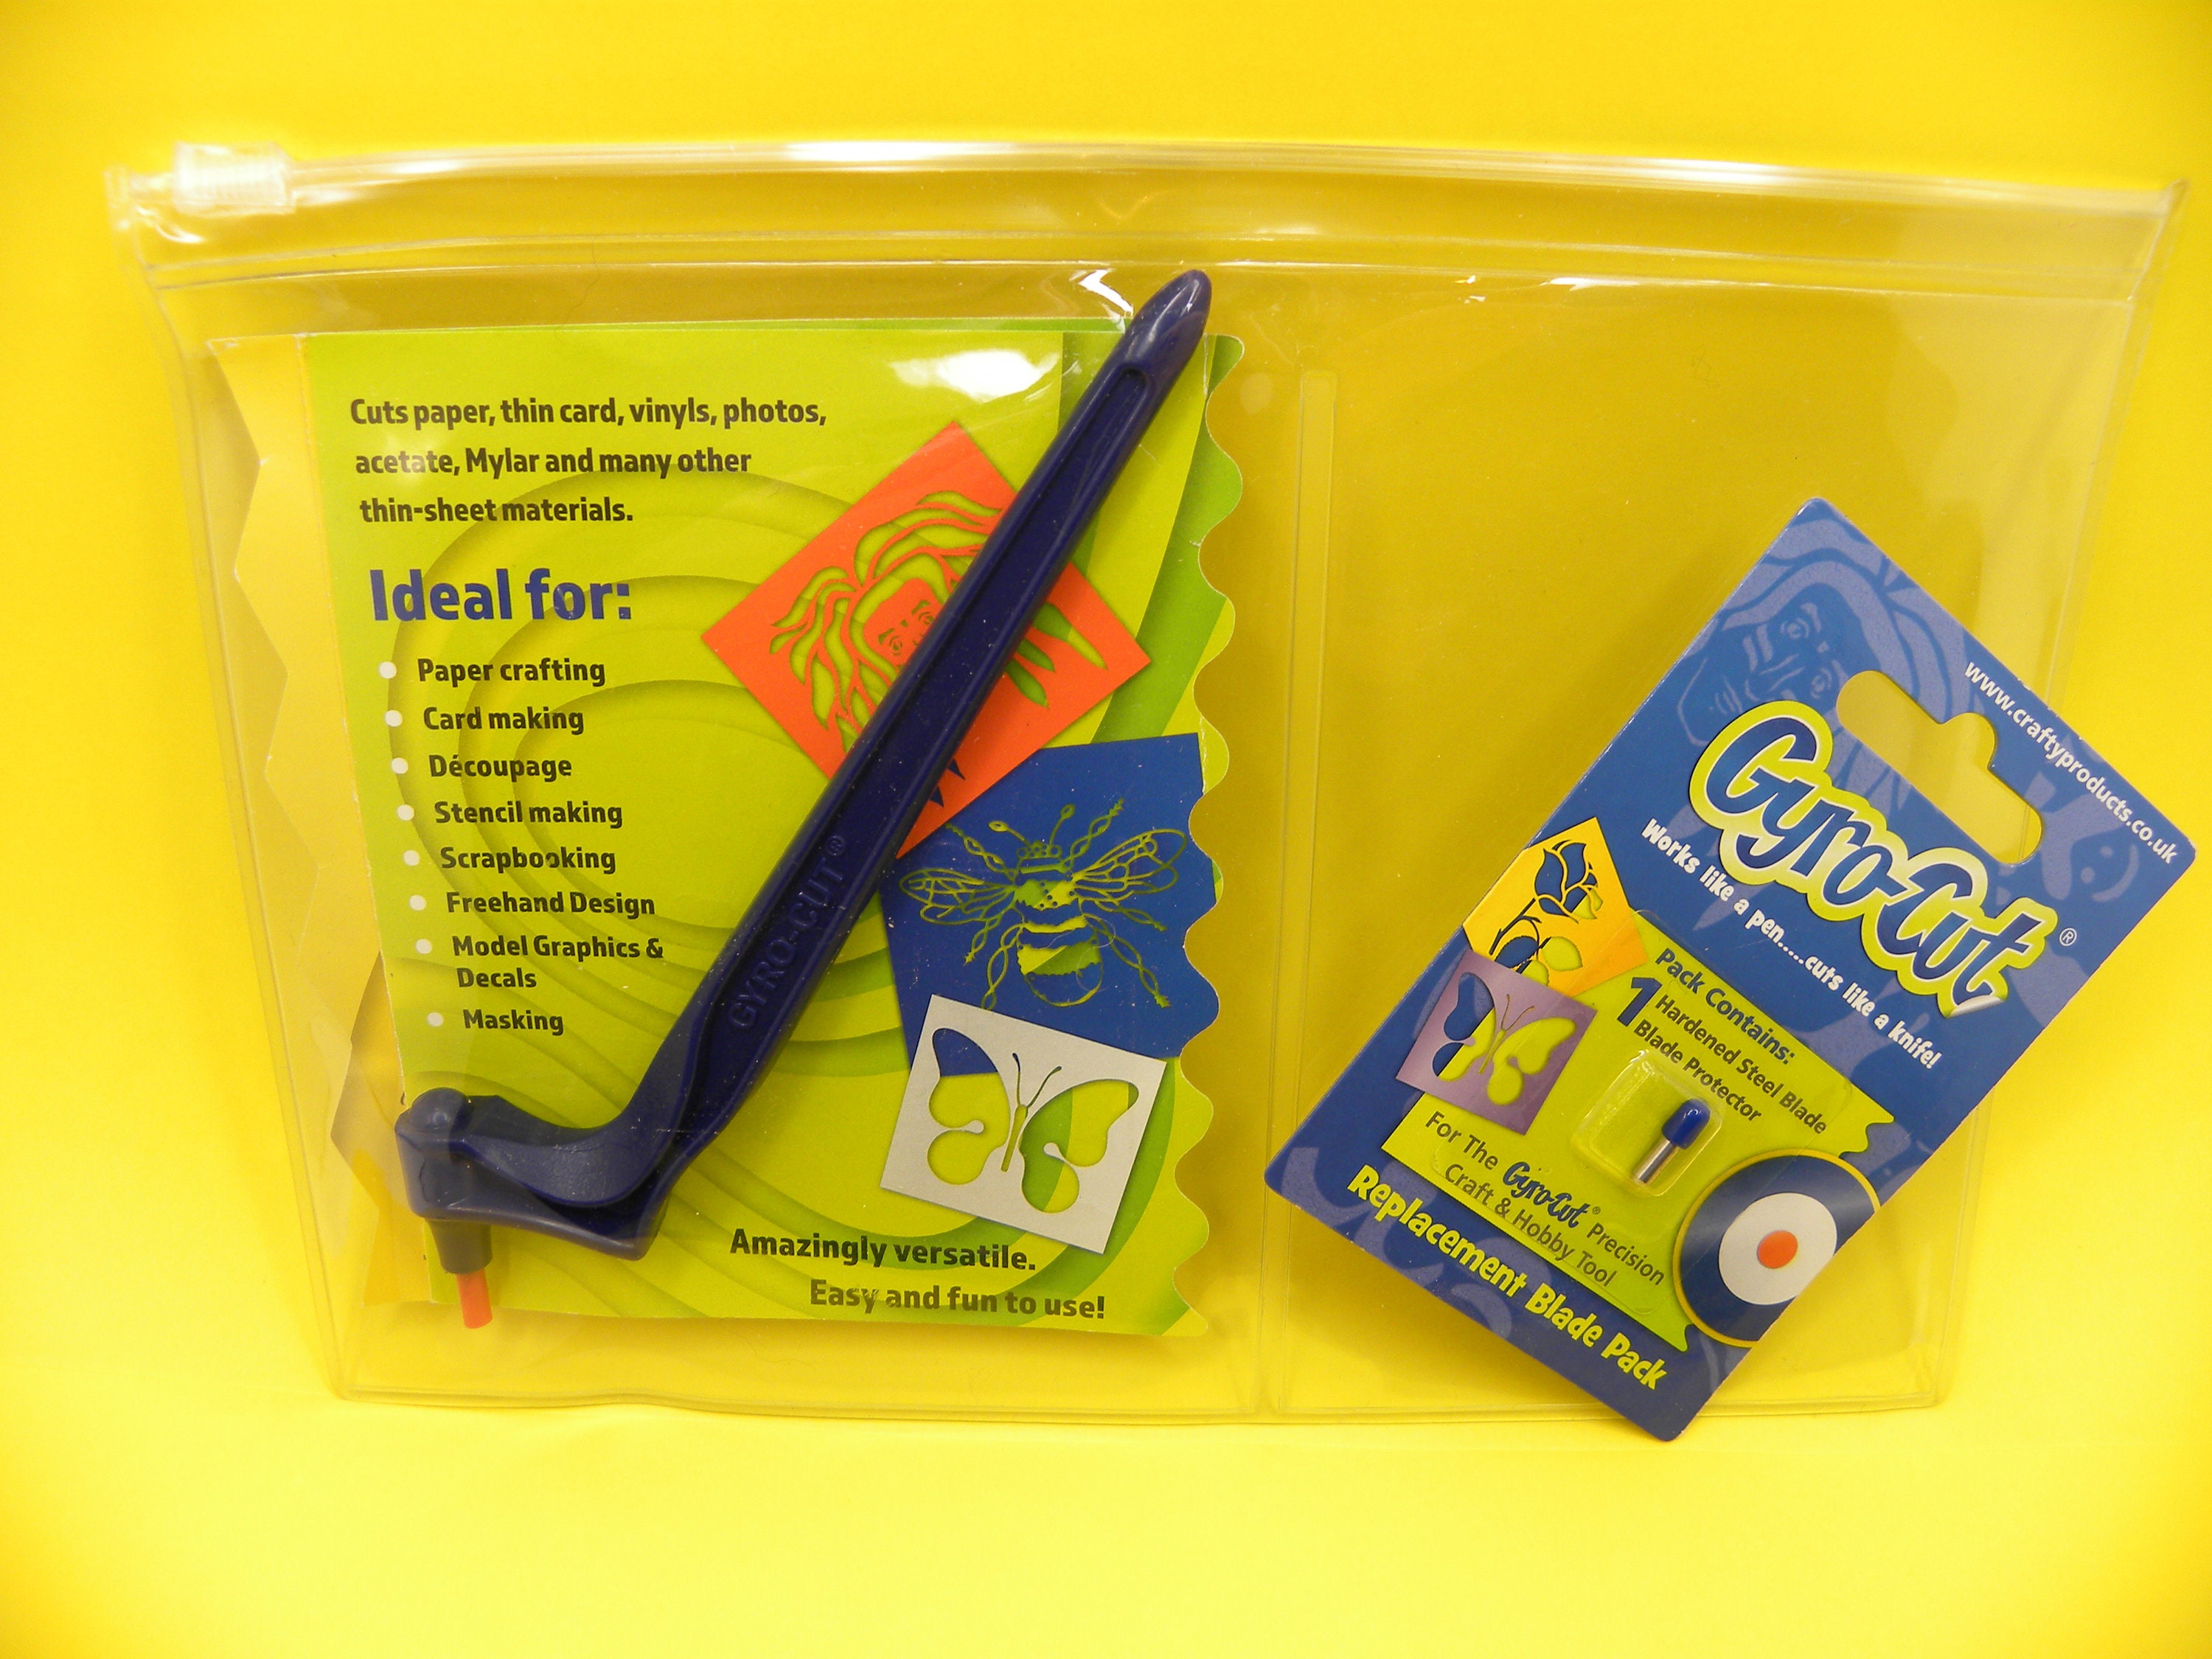 Gyrocut Set With Sticky Mat Adhesive 2 Blade Packs + A4 Cutting